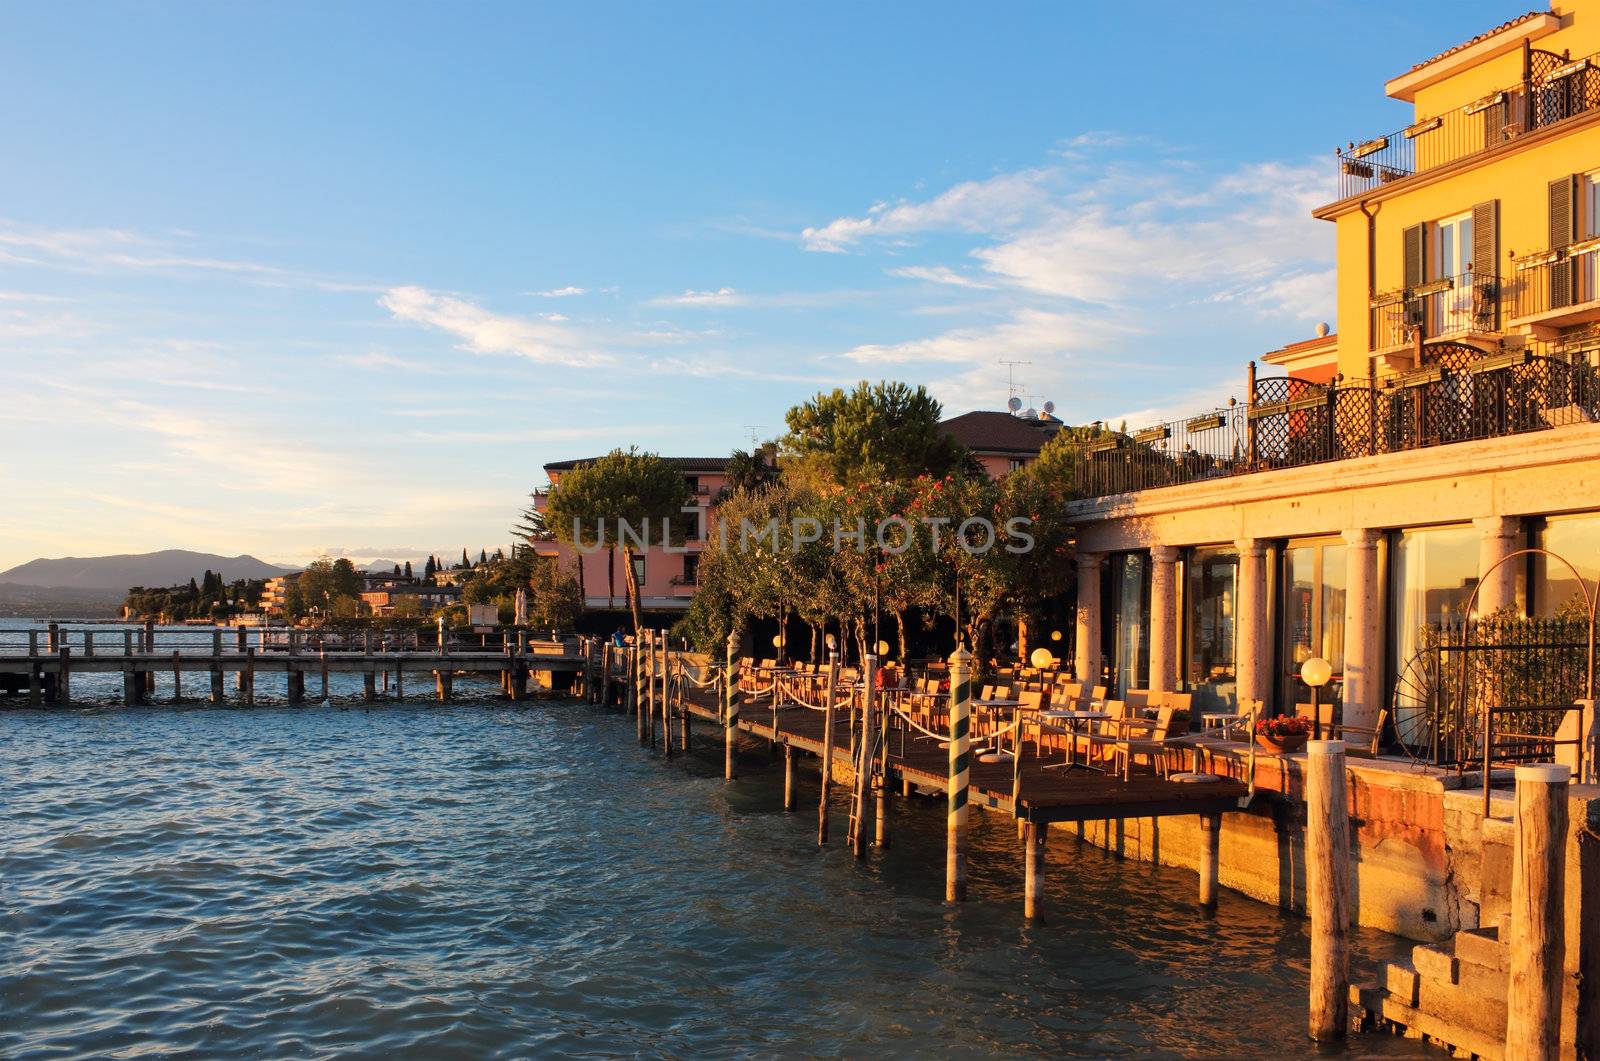 Sunset view of the jetty port in Sirmione on Lago di Garda, Italy.